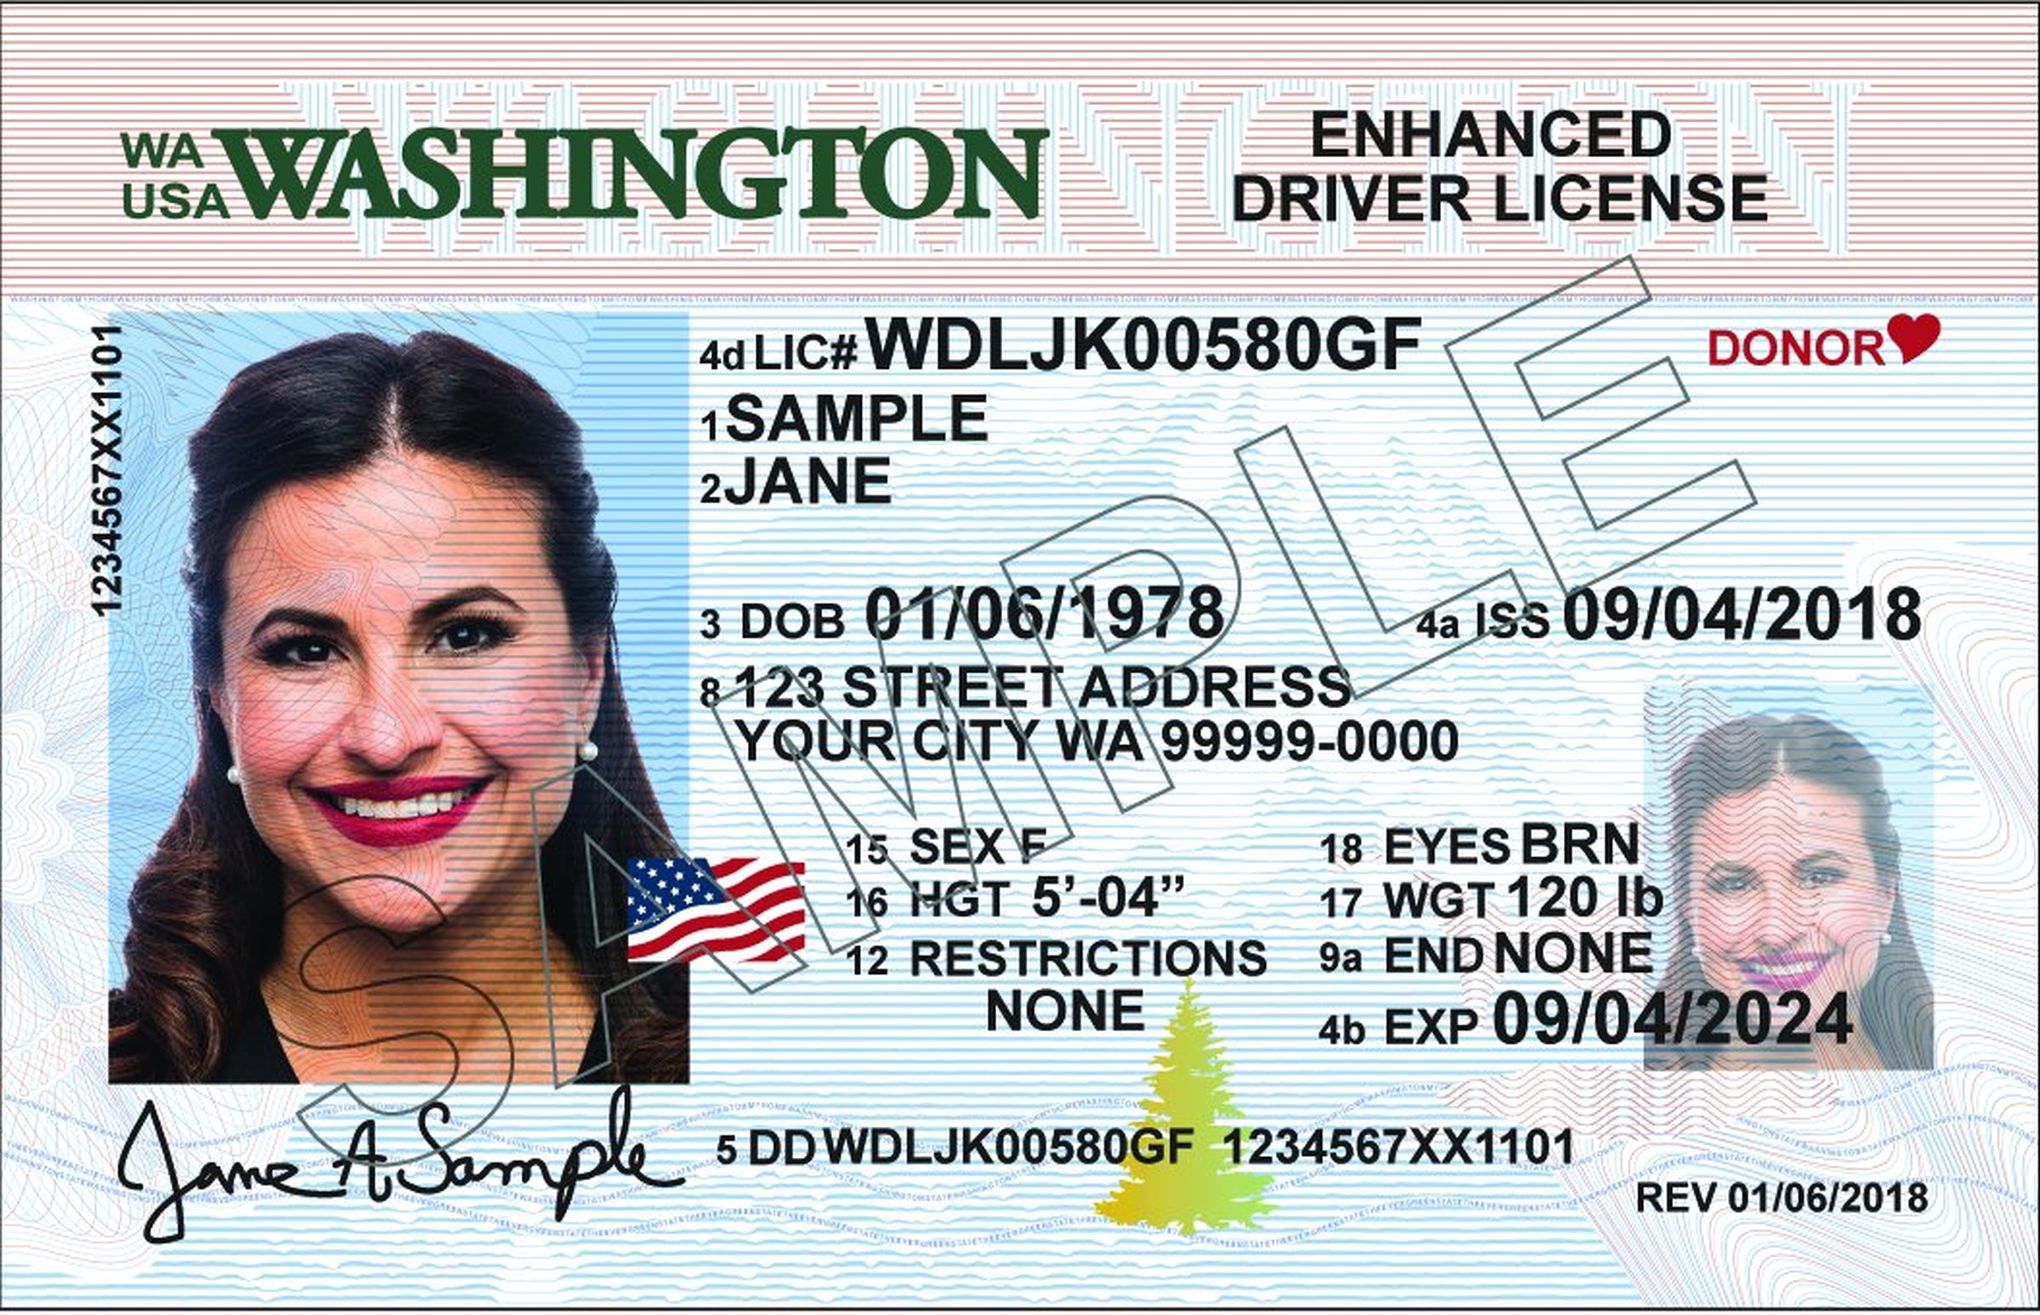 Driver's license must have gold star on top right-hand corner by